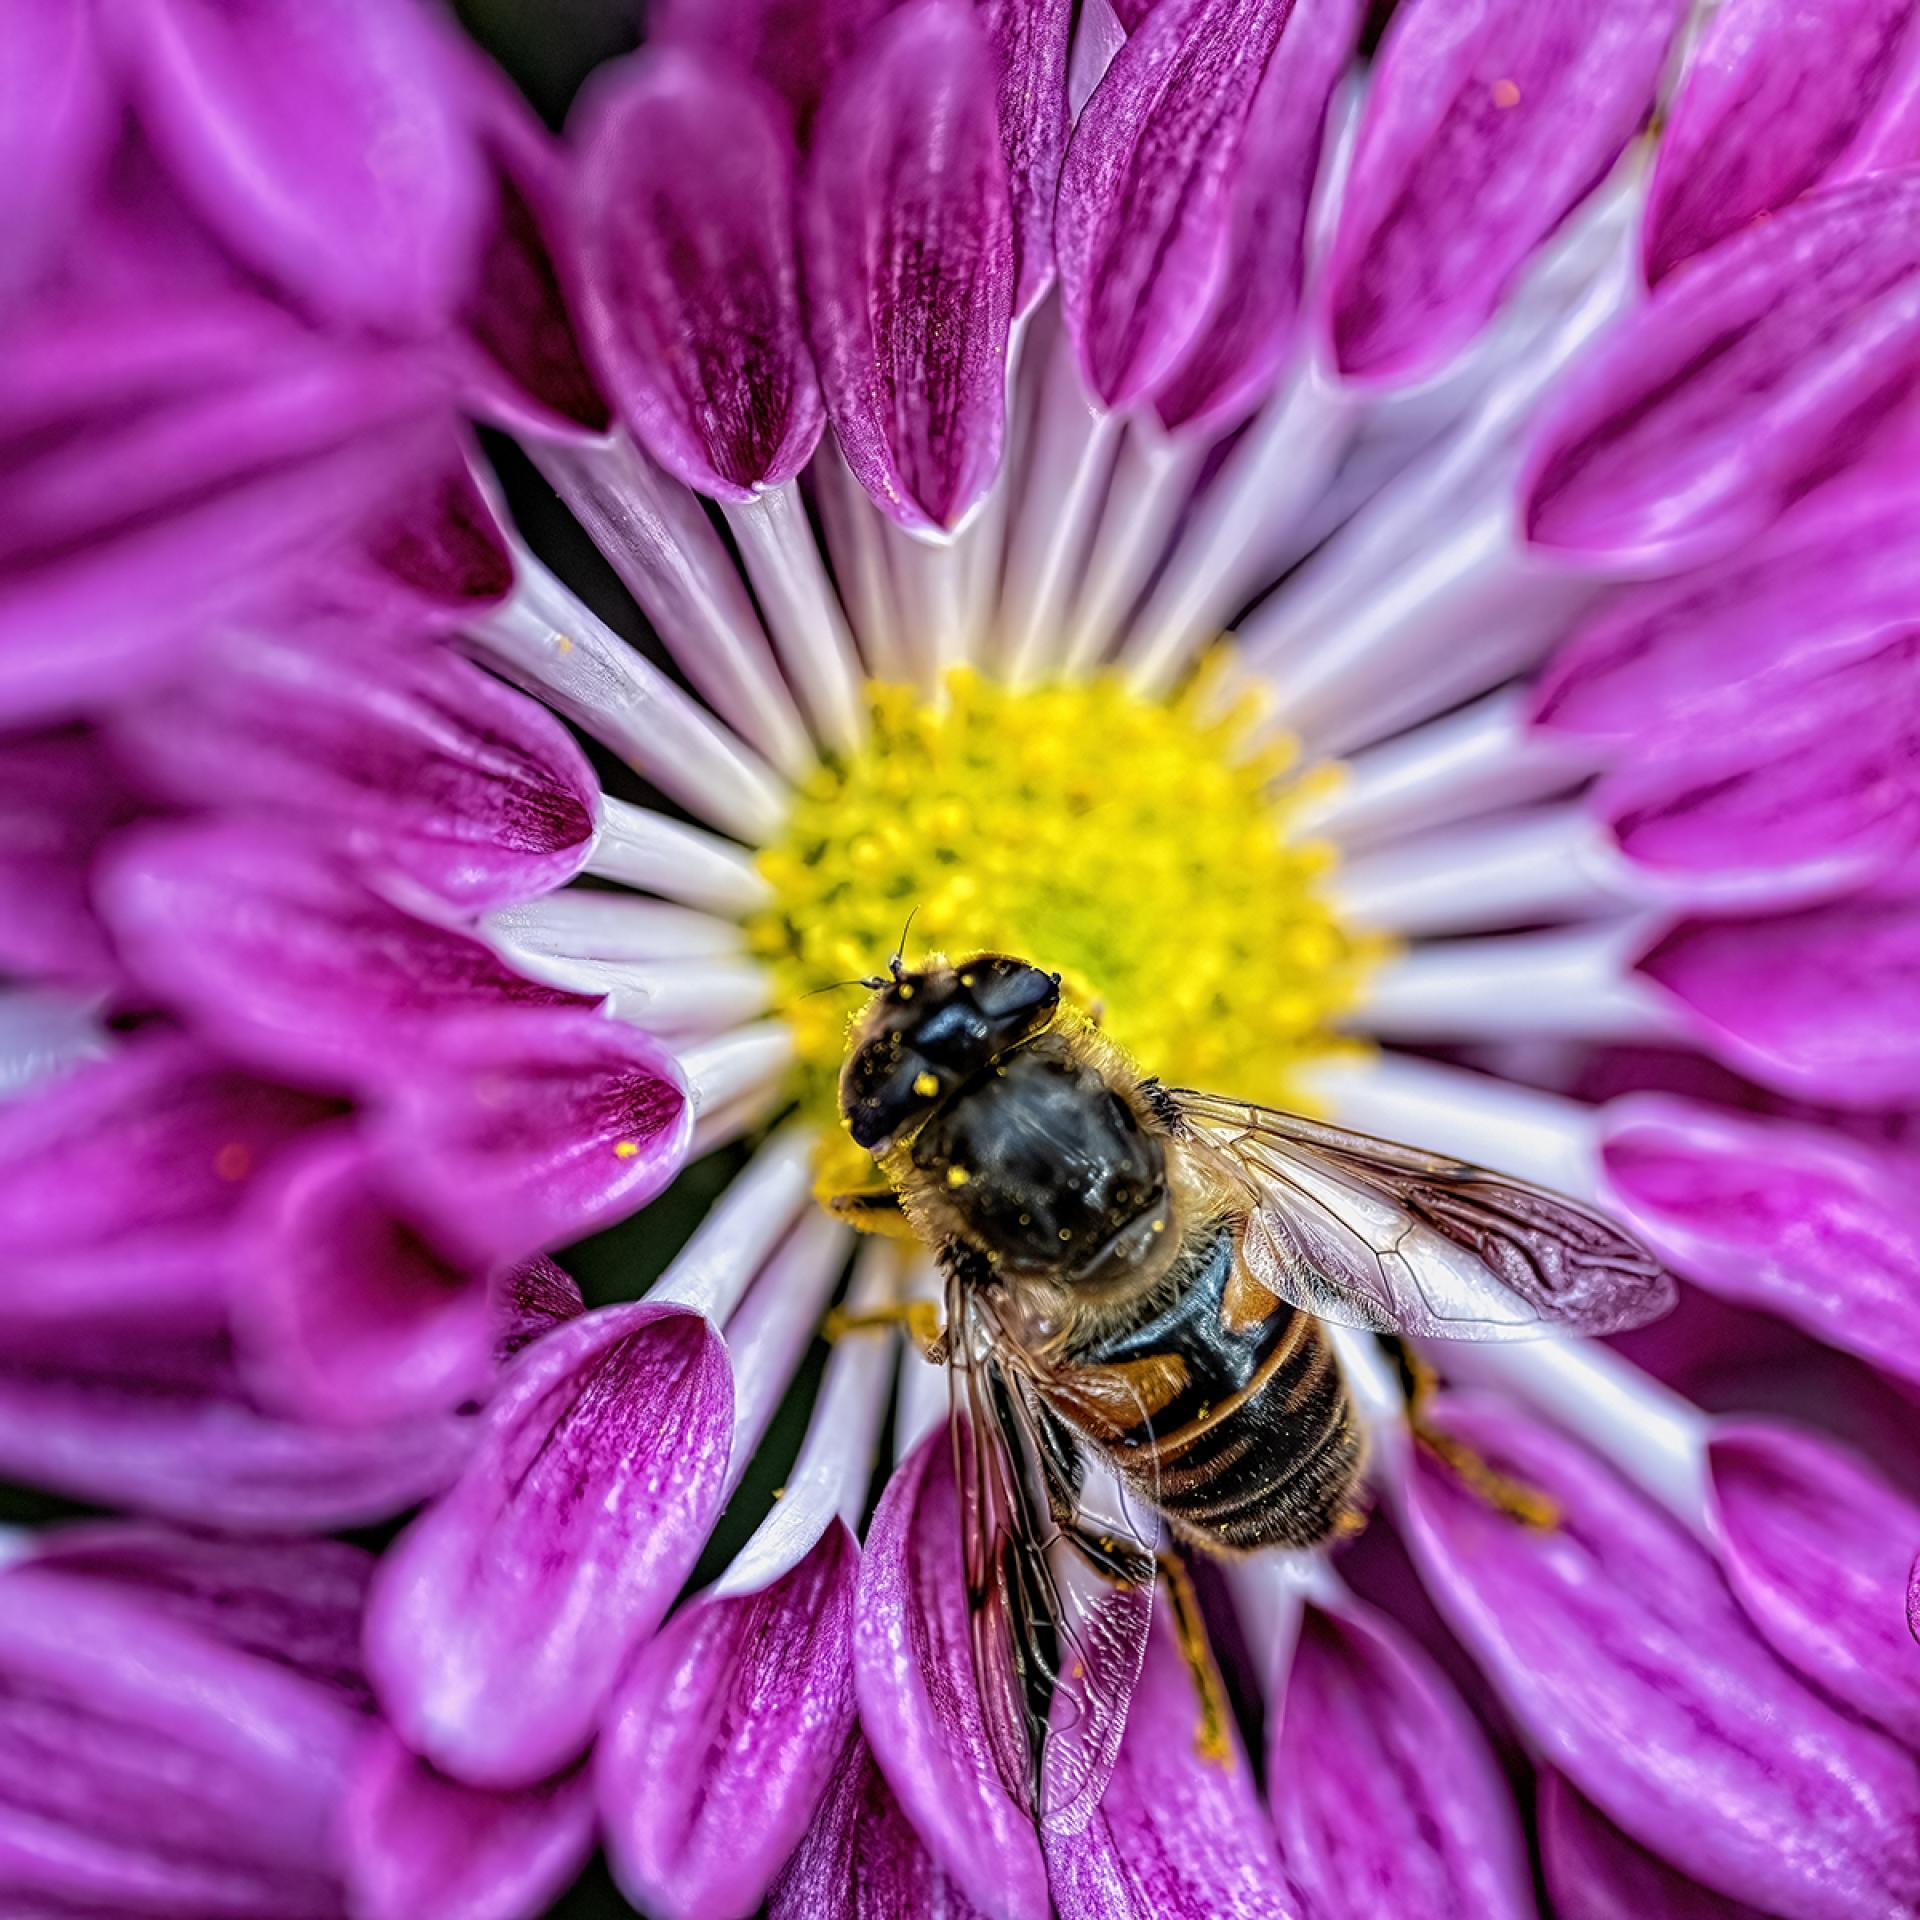 London Photography Awards Winner - Flower and Bee